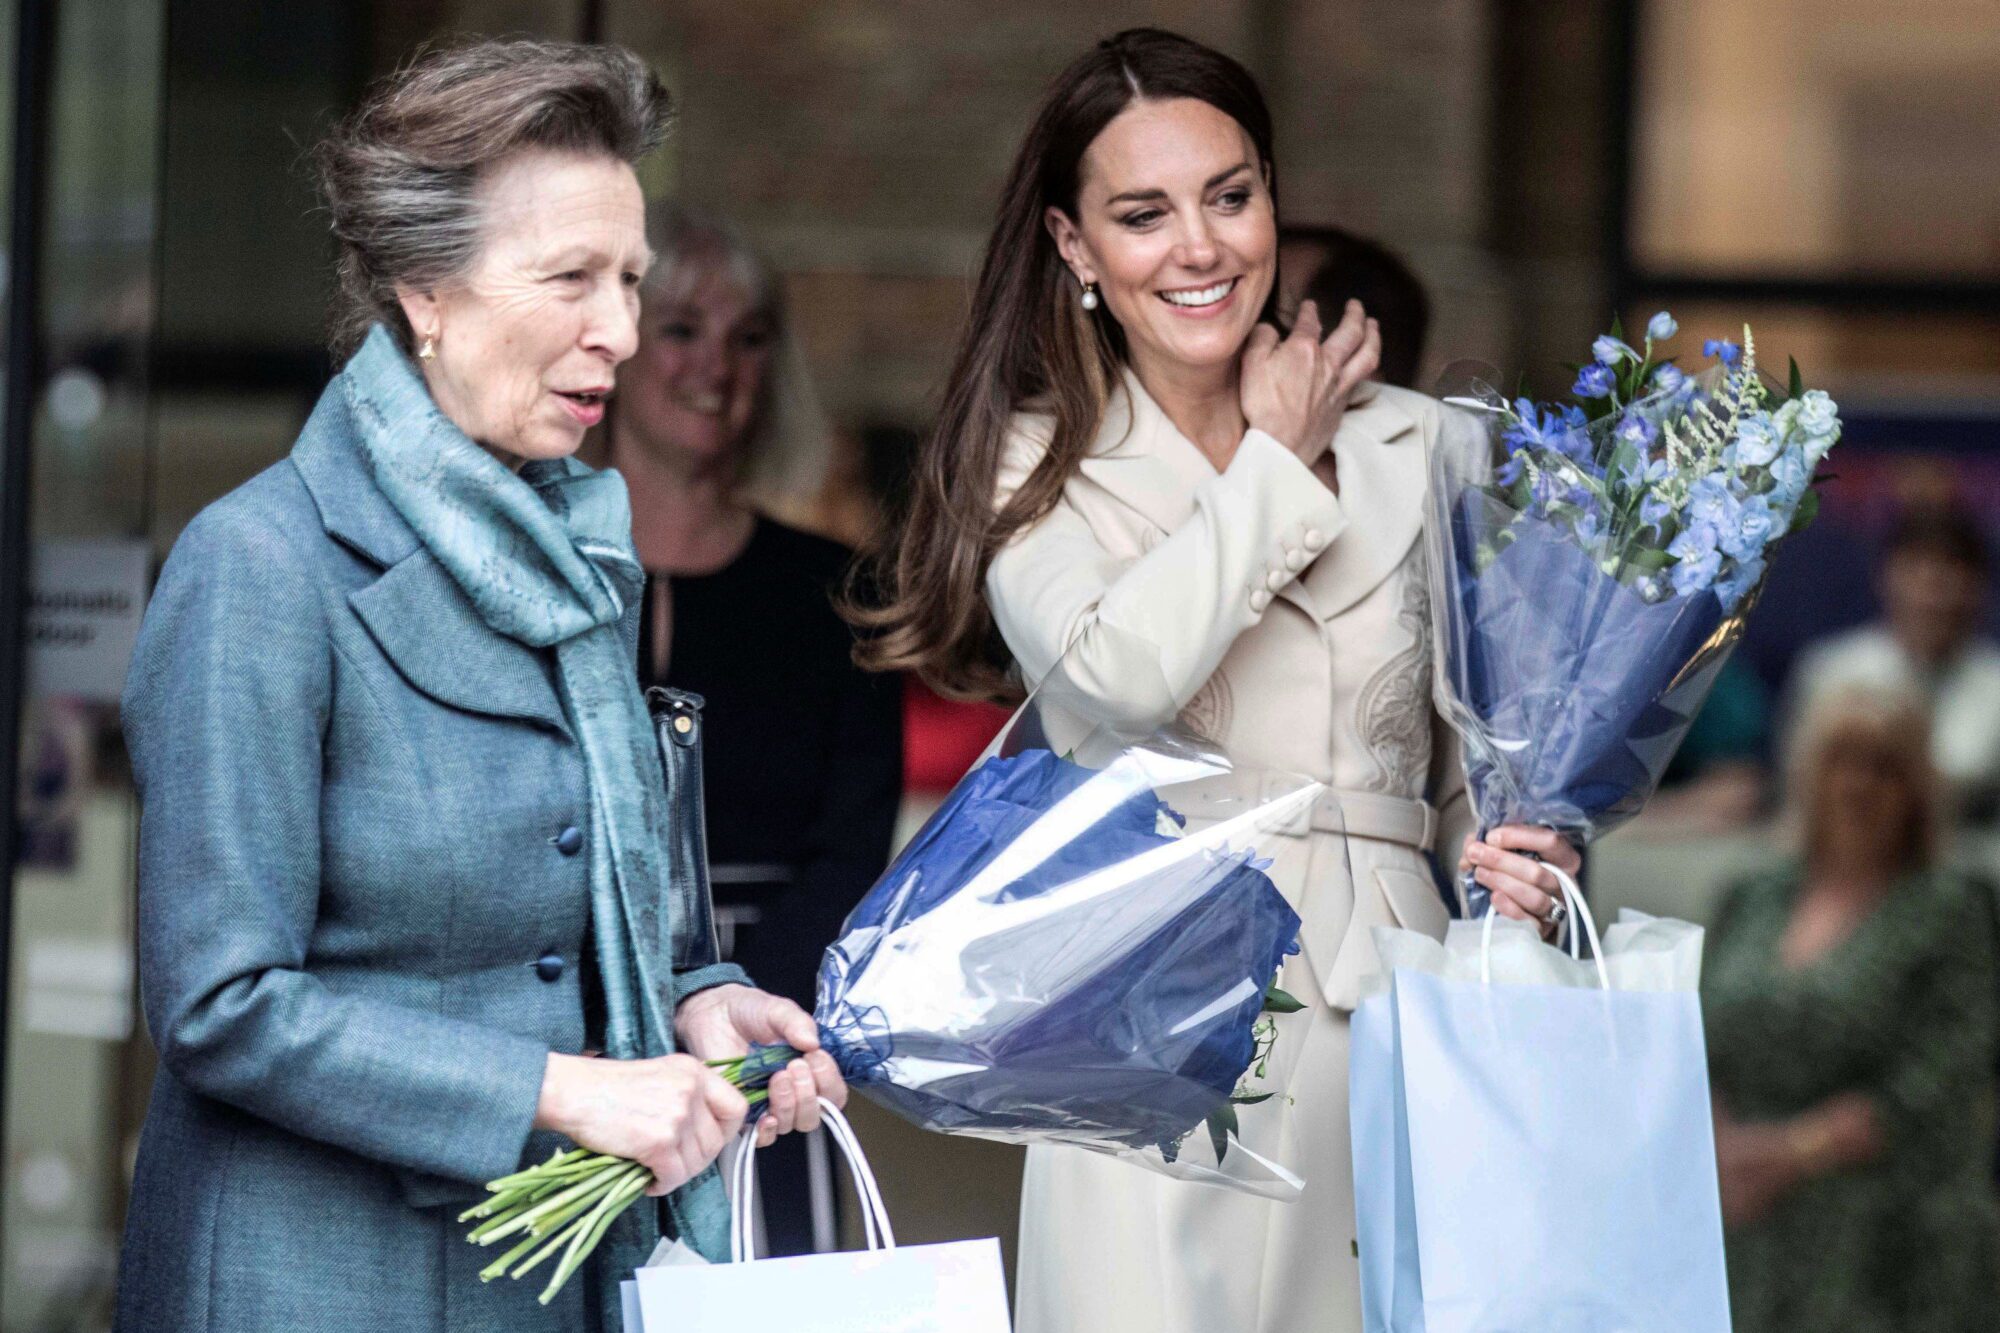 Britain's Anne, Princess Royal and Catherine, Duchess of Cambridge receive flowers after visiting the Royal College of Midwives and Royal College of Obstetricians and Gynaecologists (RCM, RCOG) headquarters in London, Britain, April 27, 2022. The Princess Royal is a patron of RCM. Richard Pohle/Pool via REUTERS